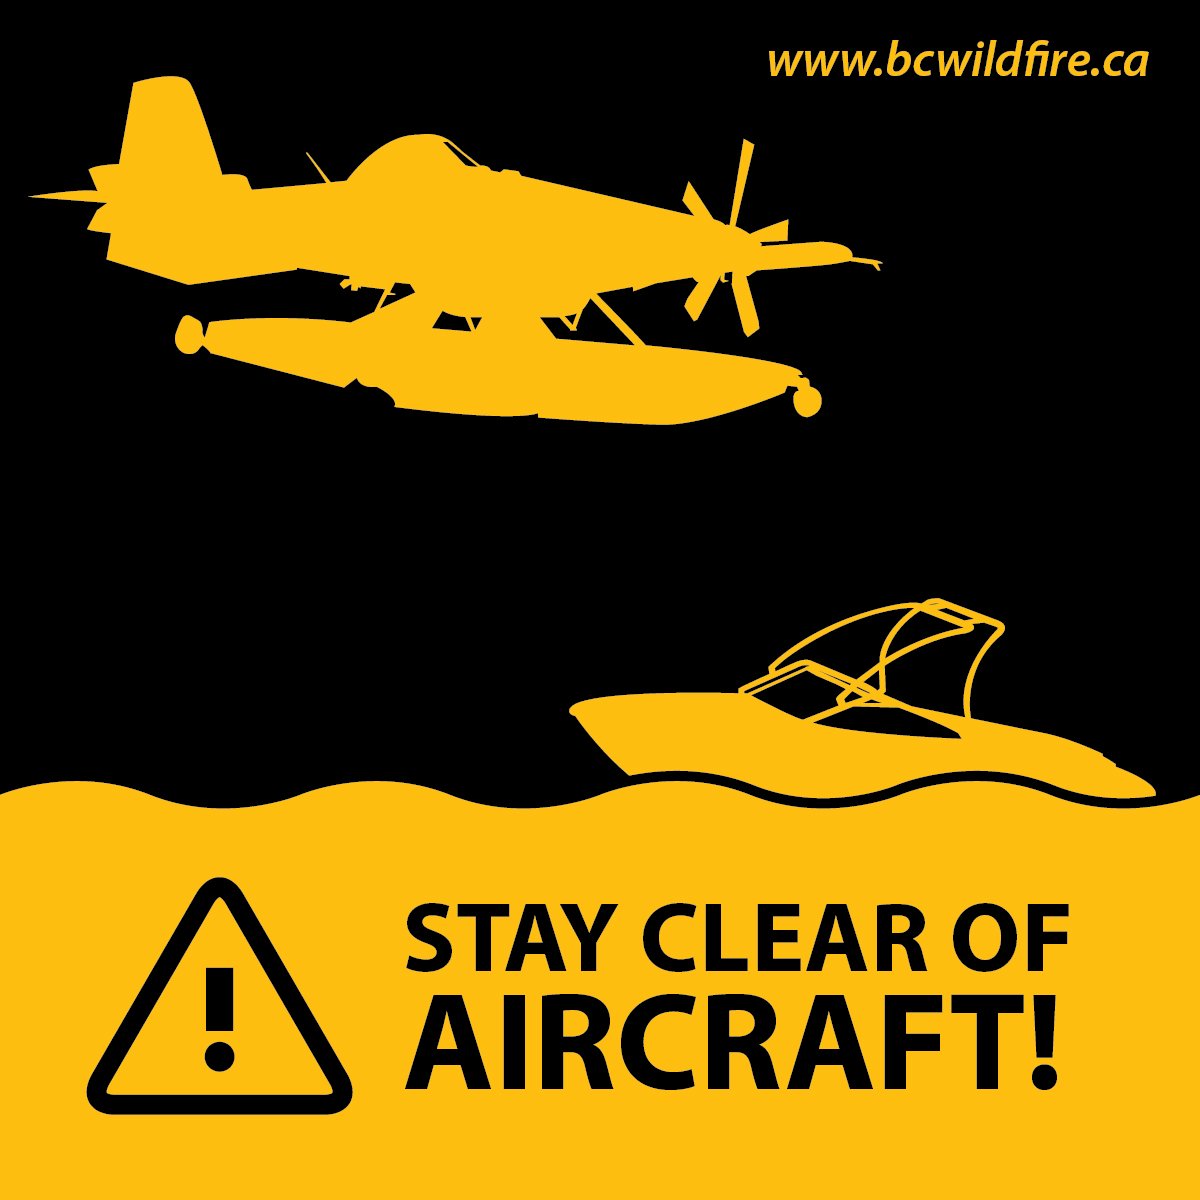 An image attached to a tweet by the BC Wildfire Service, about how a number of lakes in the Cariboo region have been closed to keep boats out of the way of aircraft.